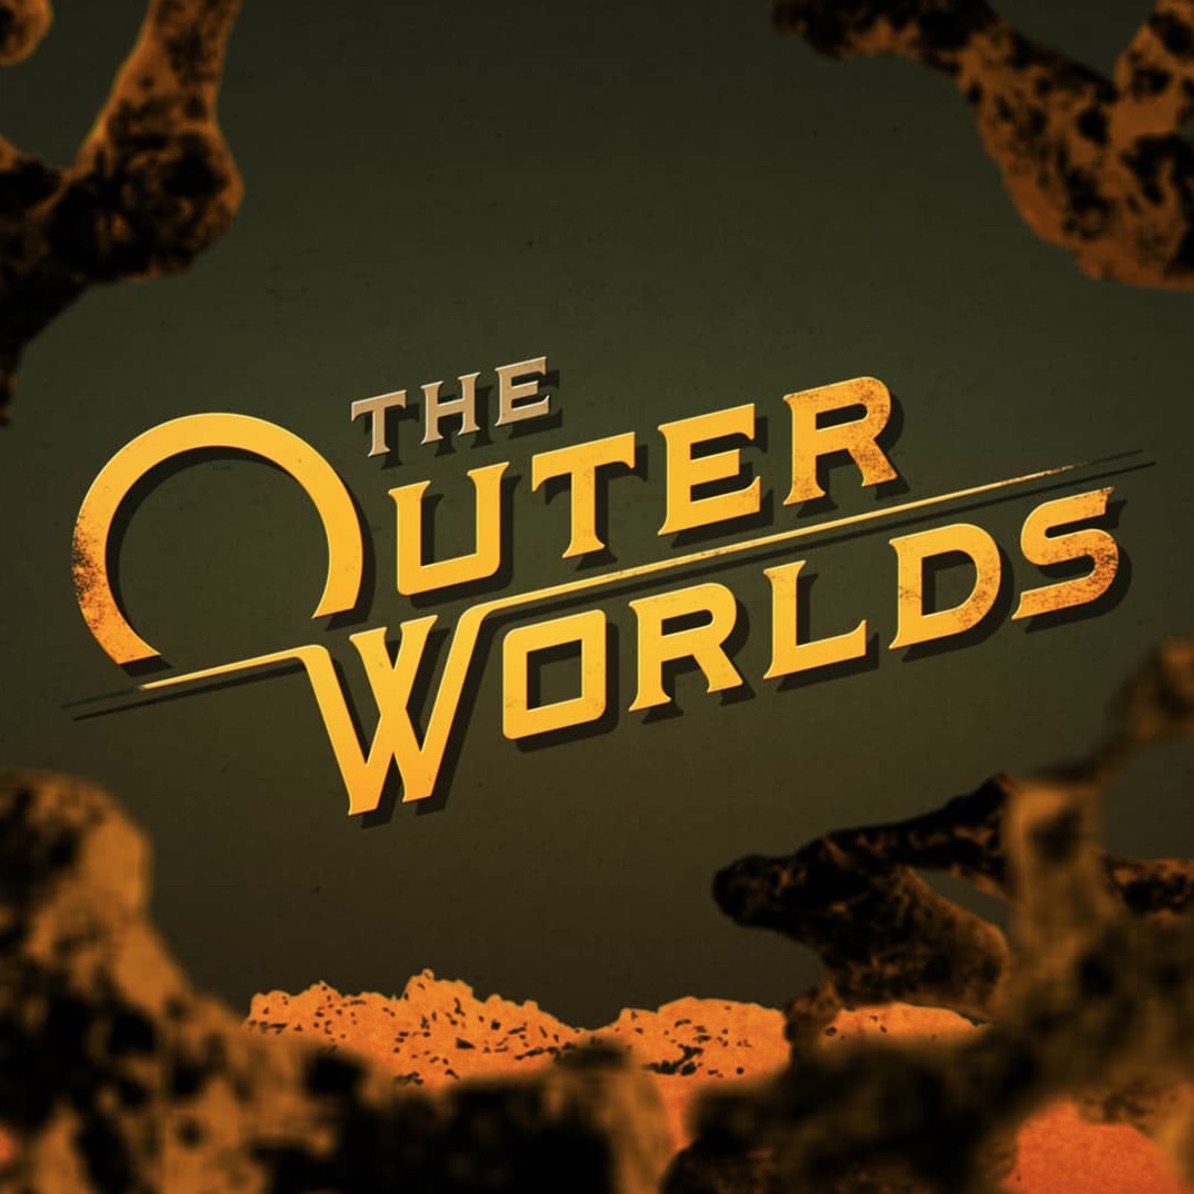 You are currently viewing Outer Worlds Trailer – Over 4M Views!